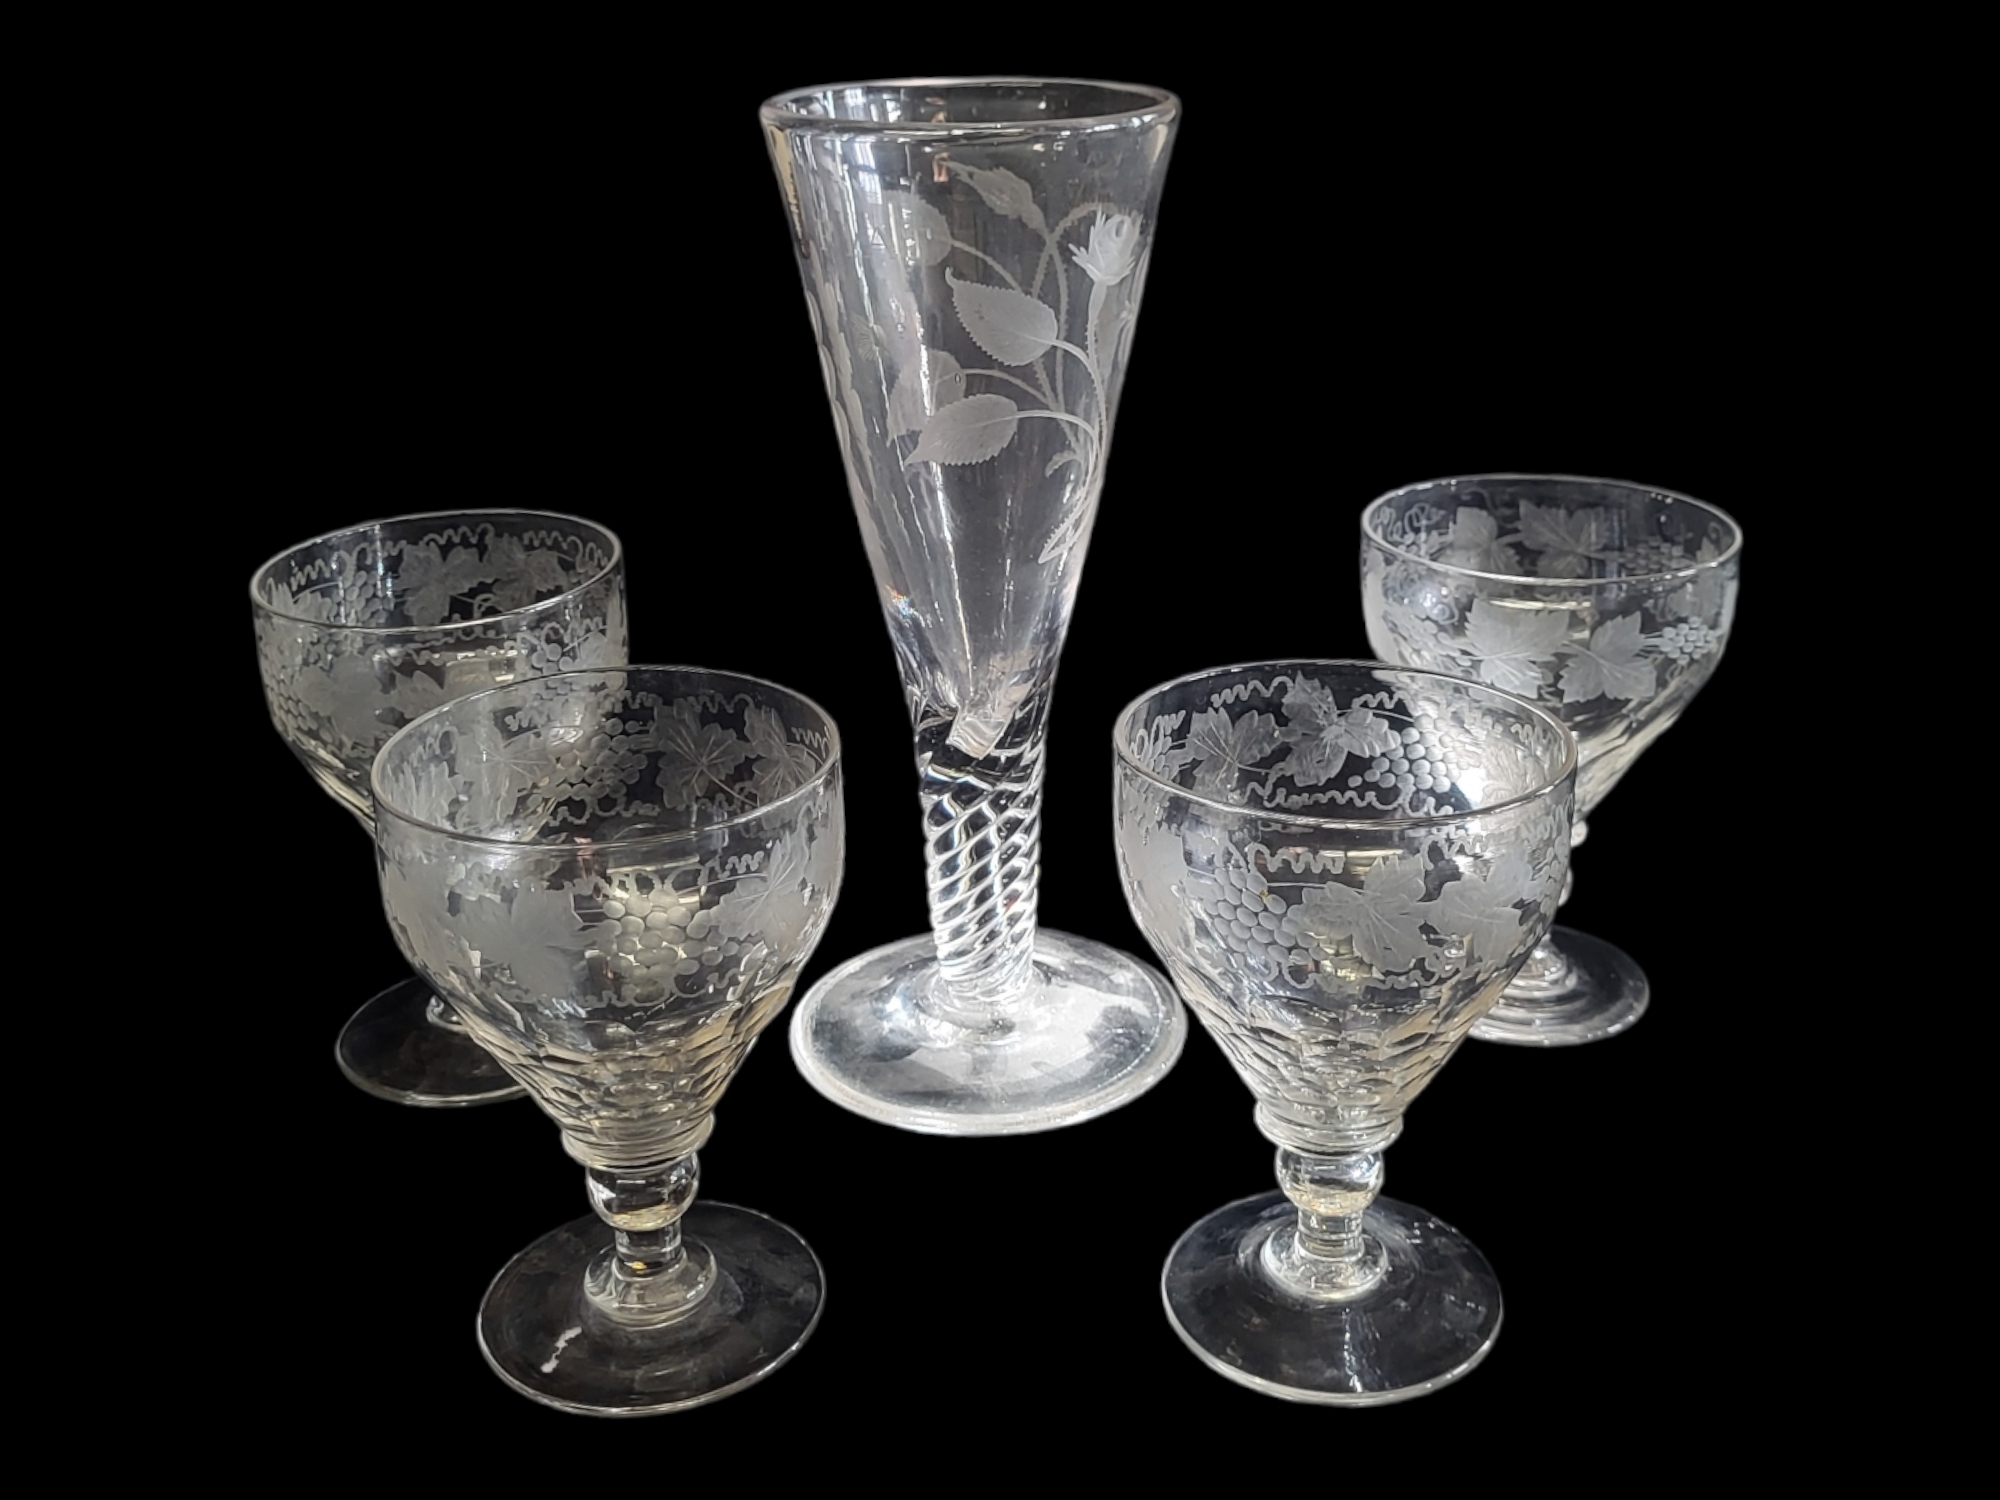 A LARGE 18TH CENTURY STYLE TRUMPET FORM PRESENTATION WINE GLASS Heavy baluster fluted bowl, engraved